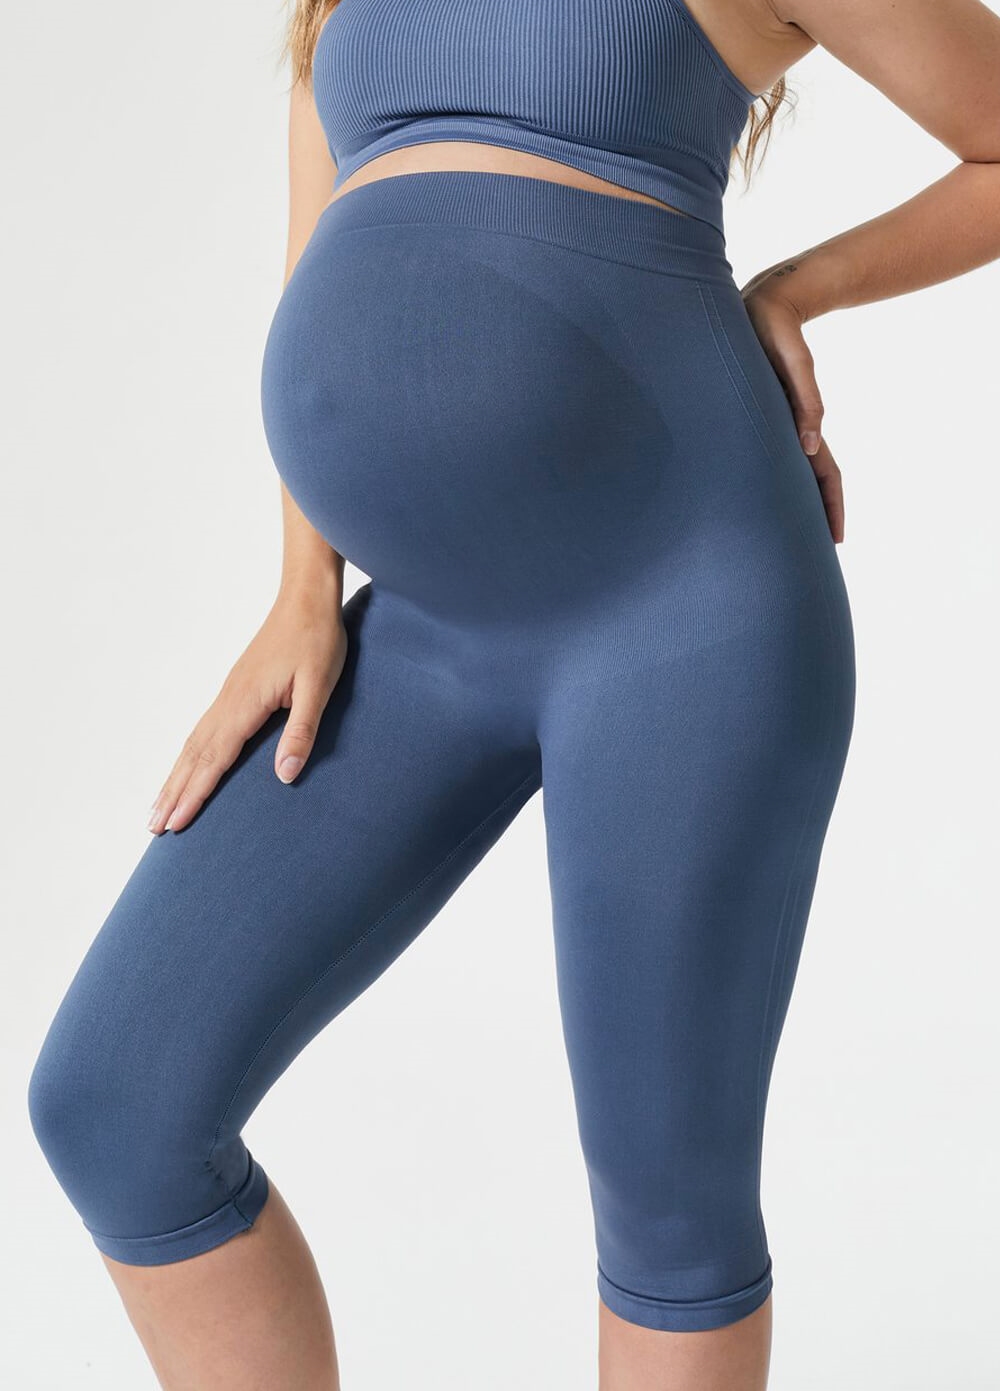 Blanqi - Maternity Belly Support Crop Leggings - Blue | Queen Bee